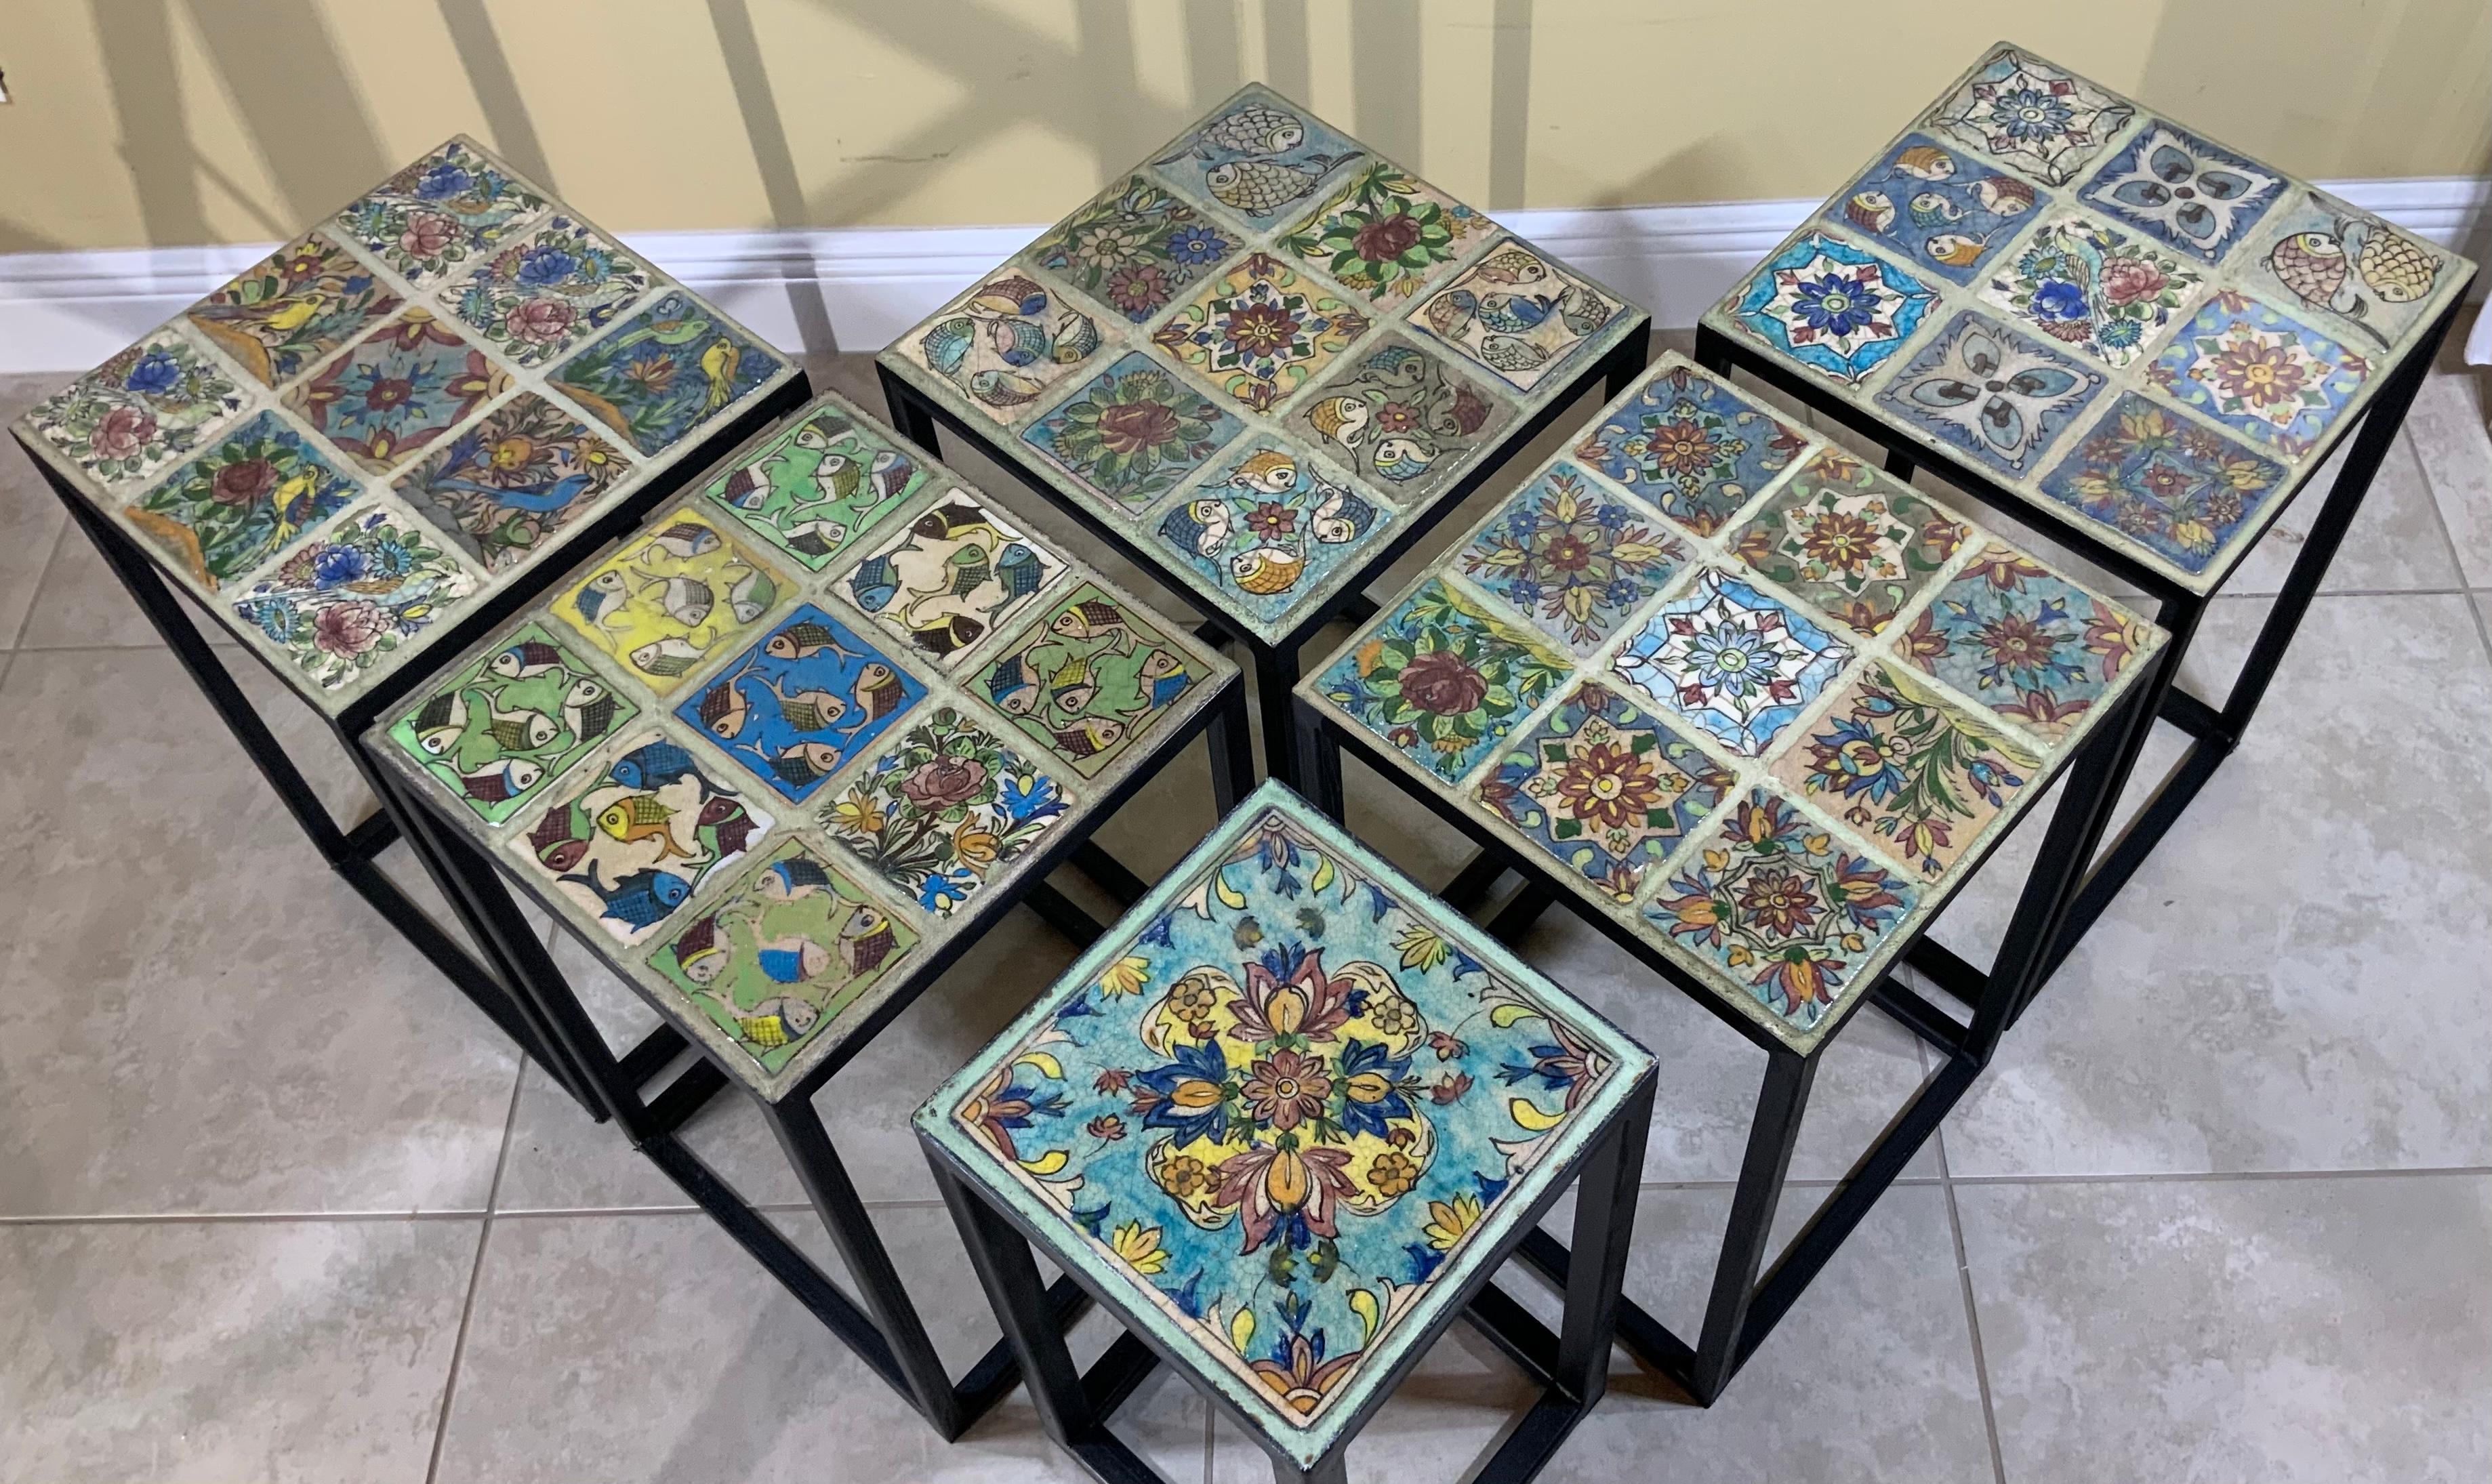 Elegant side tables made of beautiful vintage hand painted and glazed ceramic tiles, professionally mounted on steel base painted in black. Decorative functional side table, also light to move, could purchase individually upon request. Price of each